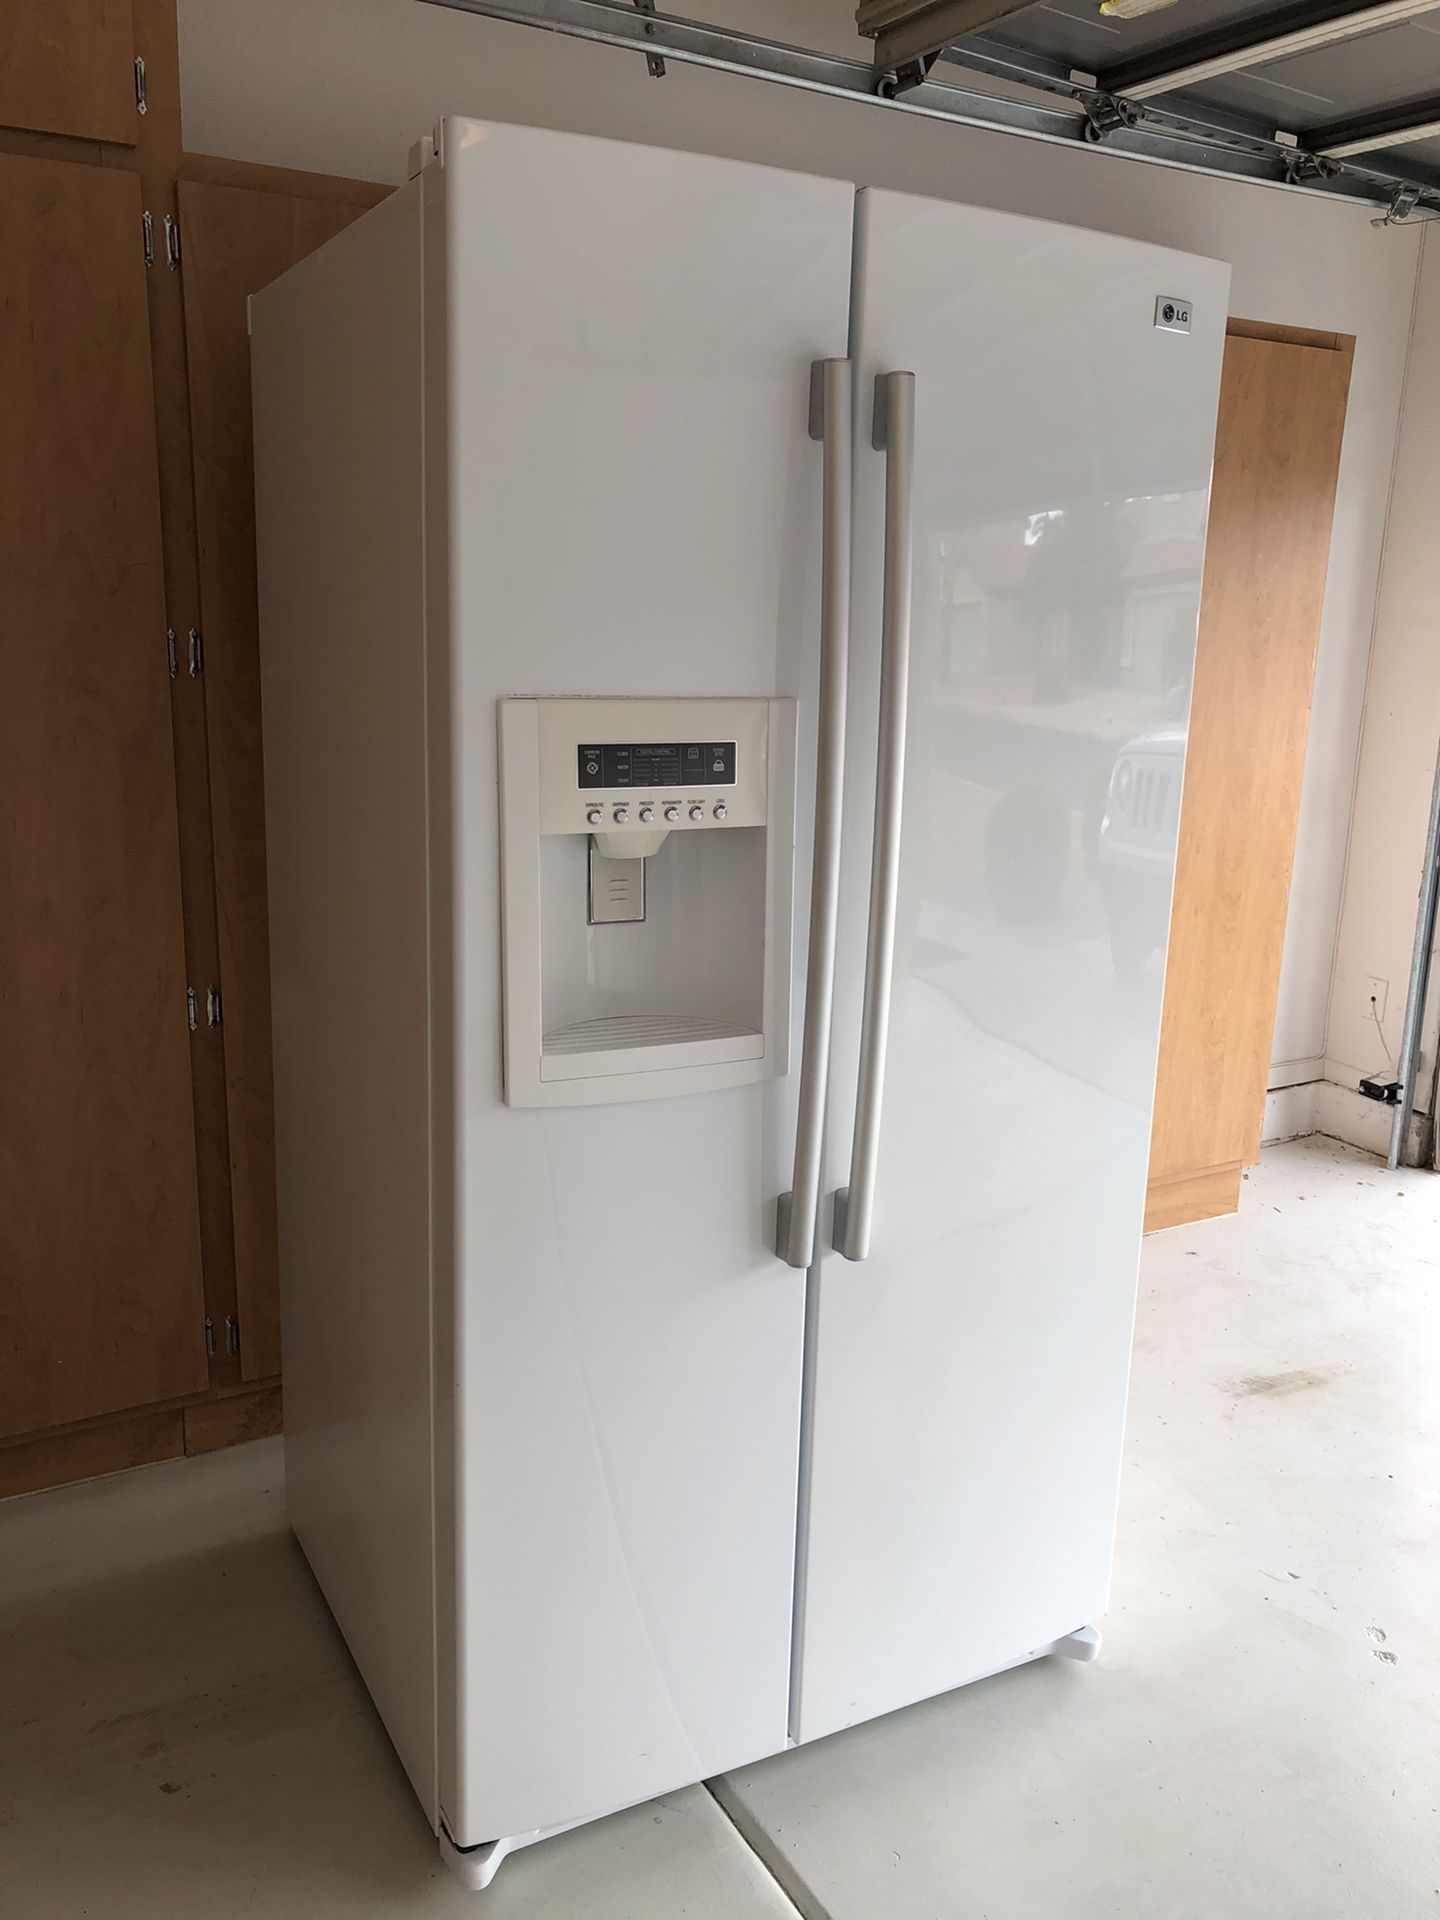 LG Refrigerator/Freezer left by previous owner $80